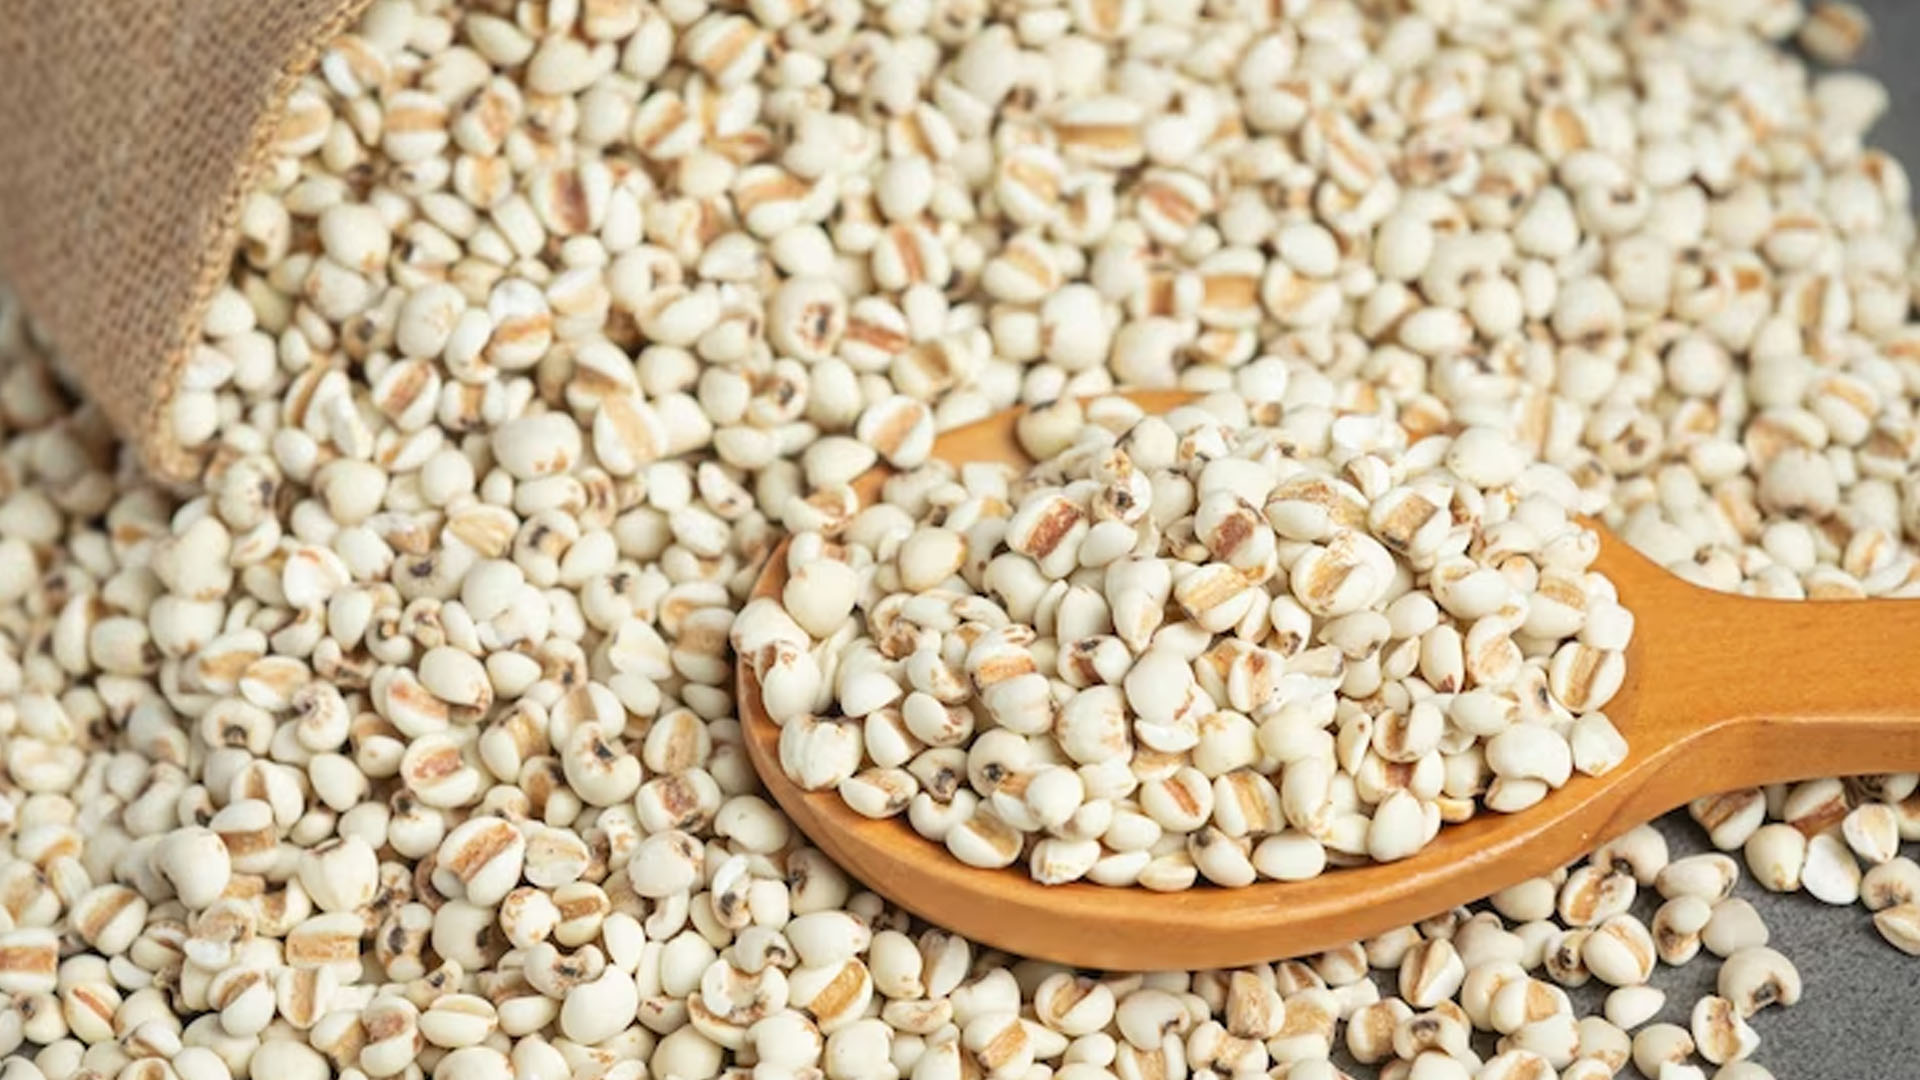 Does Pearl Barley Have Any Health Benefits?